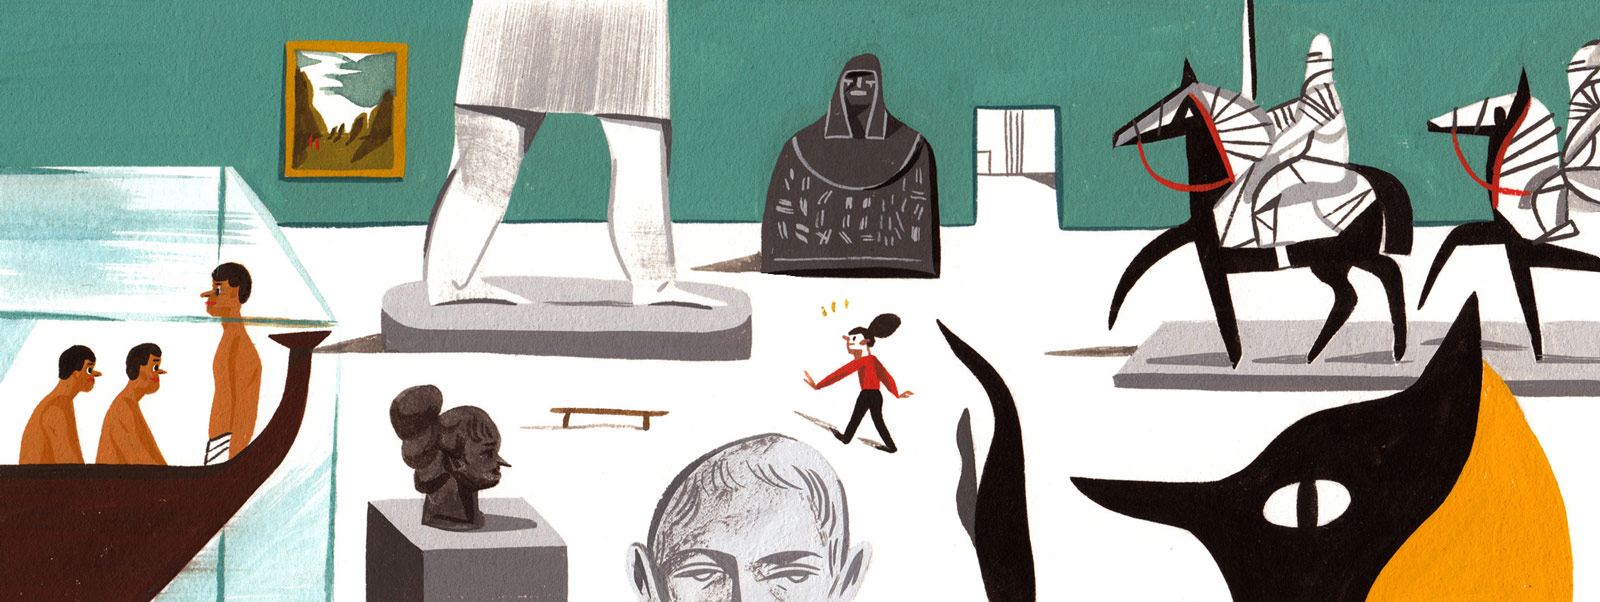 For the Sunday Times 'My Dream Sunday' column, illustrating getting lost in a museum and all its wonders